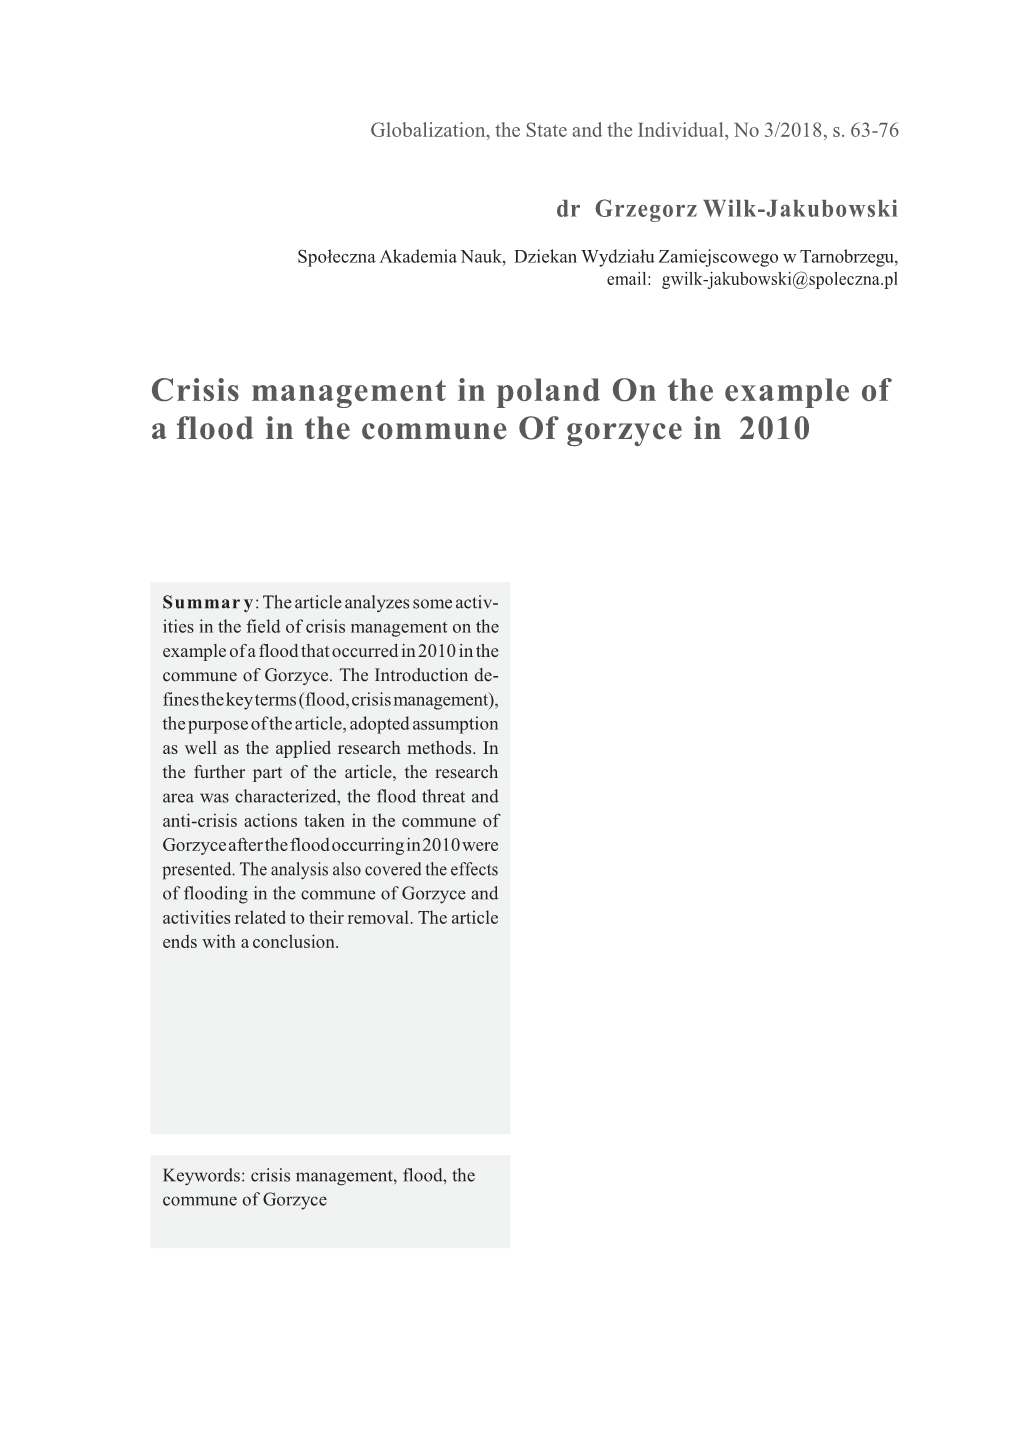 Crisis Management in Poland on the Example of a Flood in the Commune of Gorzyce in 2010